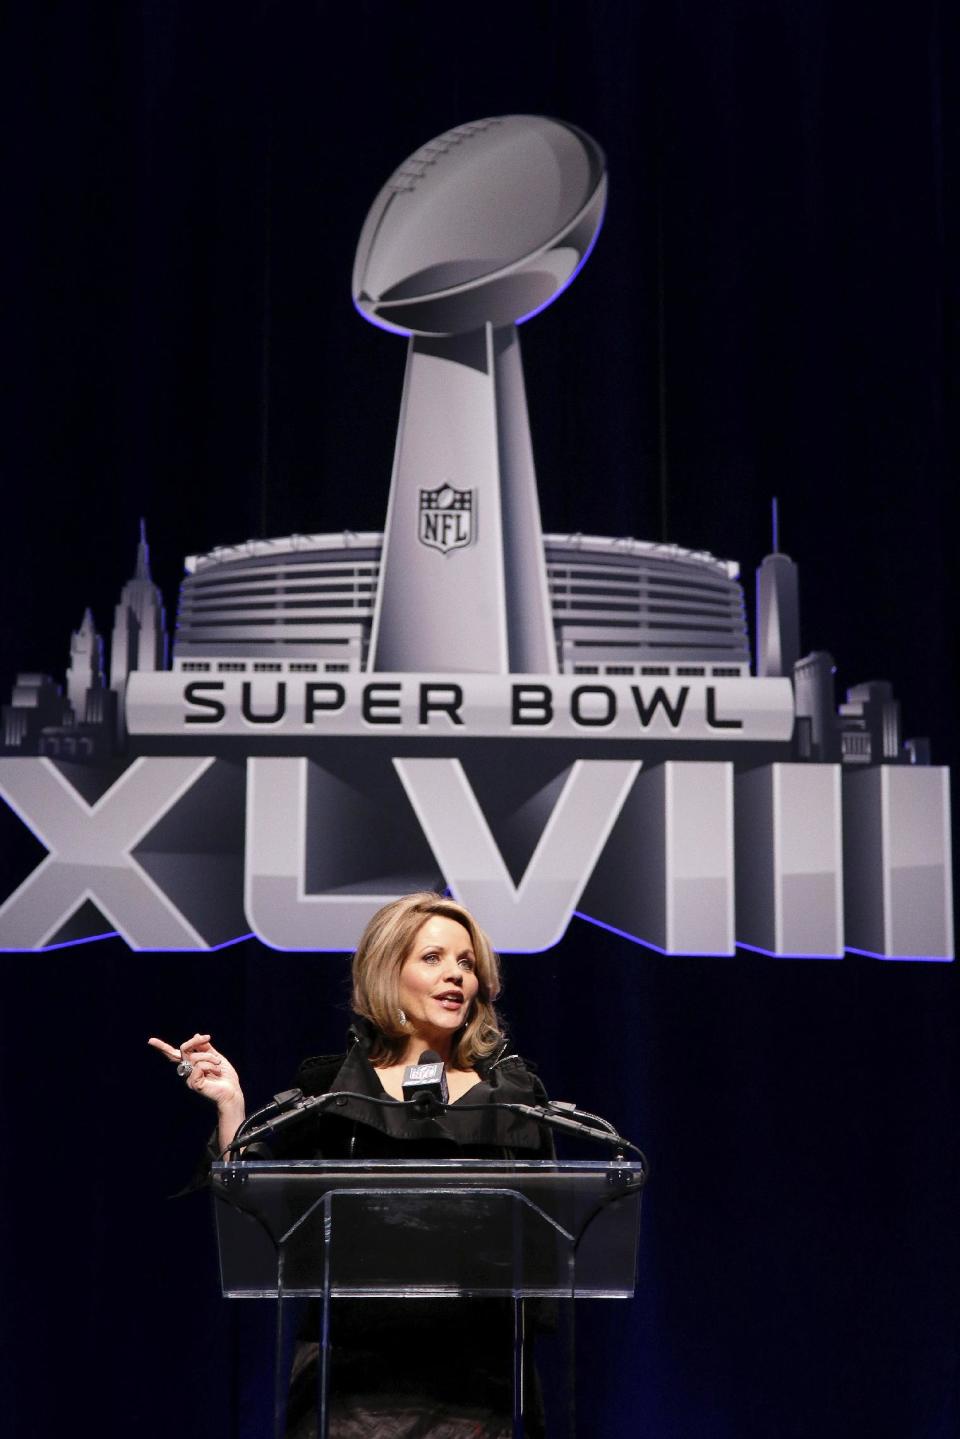 Opera singer Renee Fleming who will sing the National Anthem before the NFL Super Bowl XLVIII football game speaks during a press conference Thursday, Jan. 30, 2014, in New York. (AP Photo)